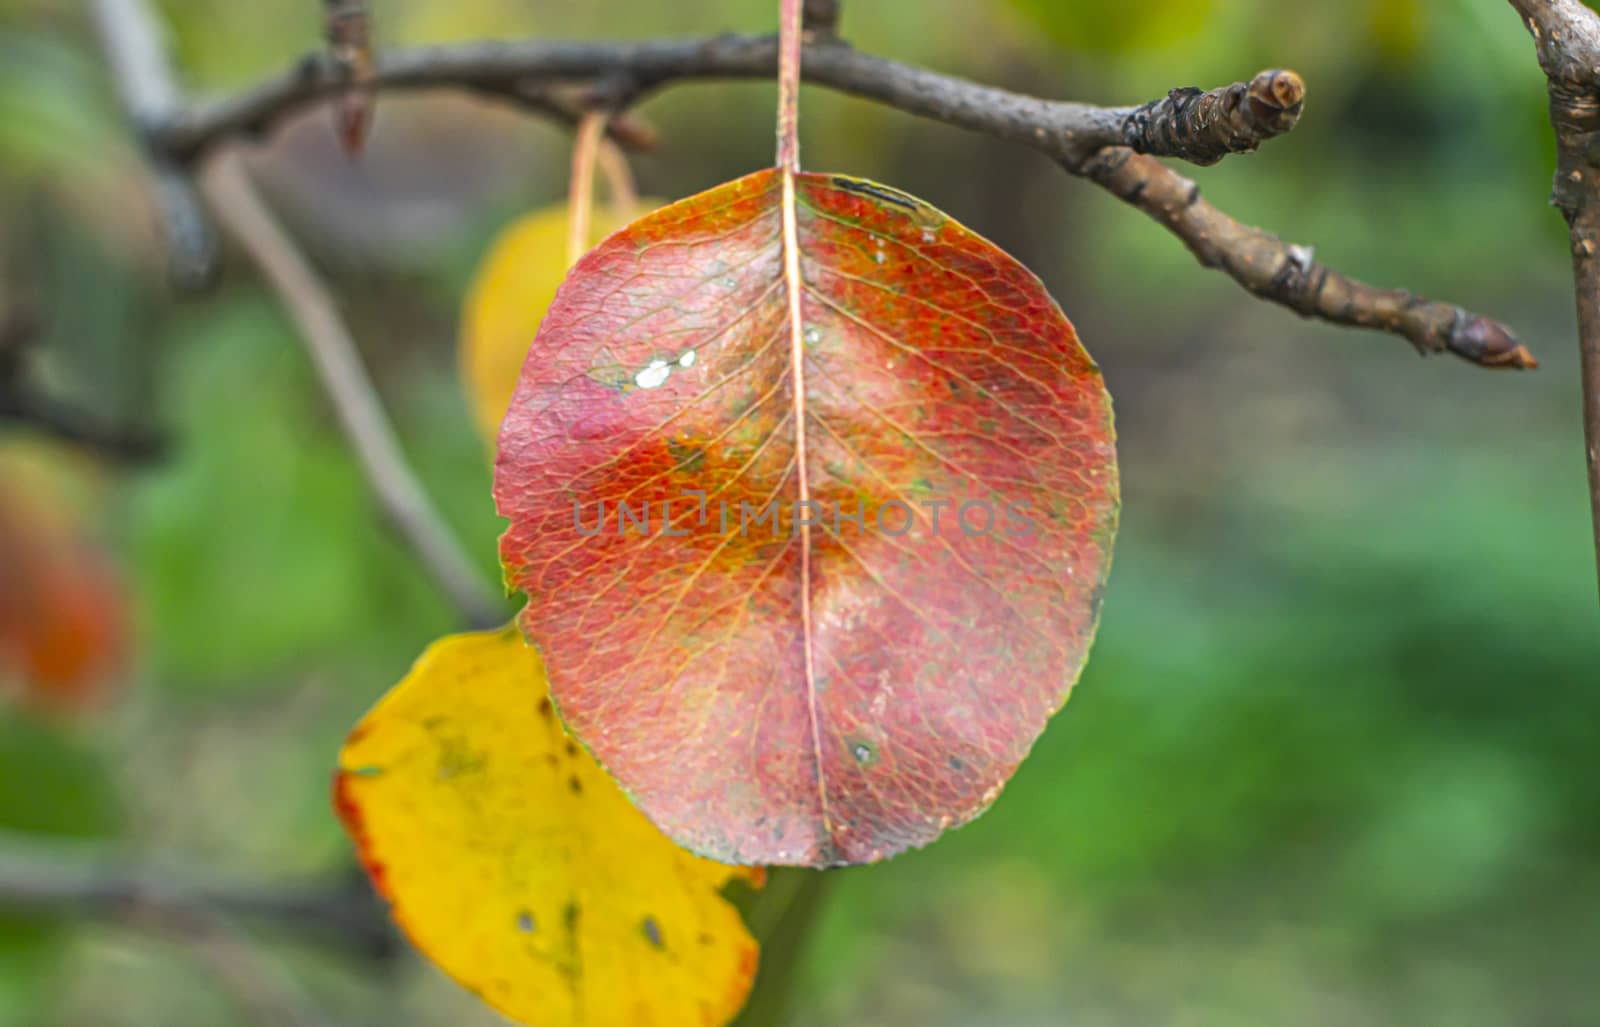 autumn leave on a tree, close up